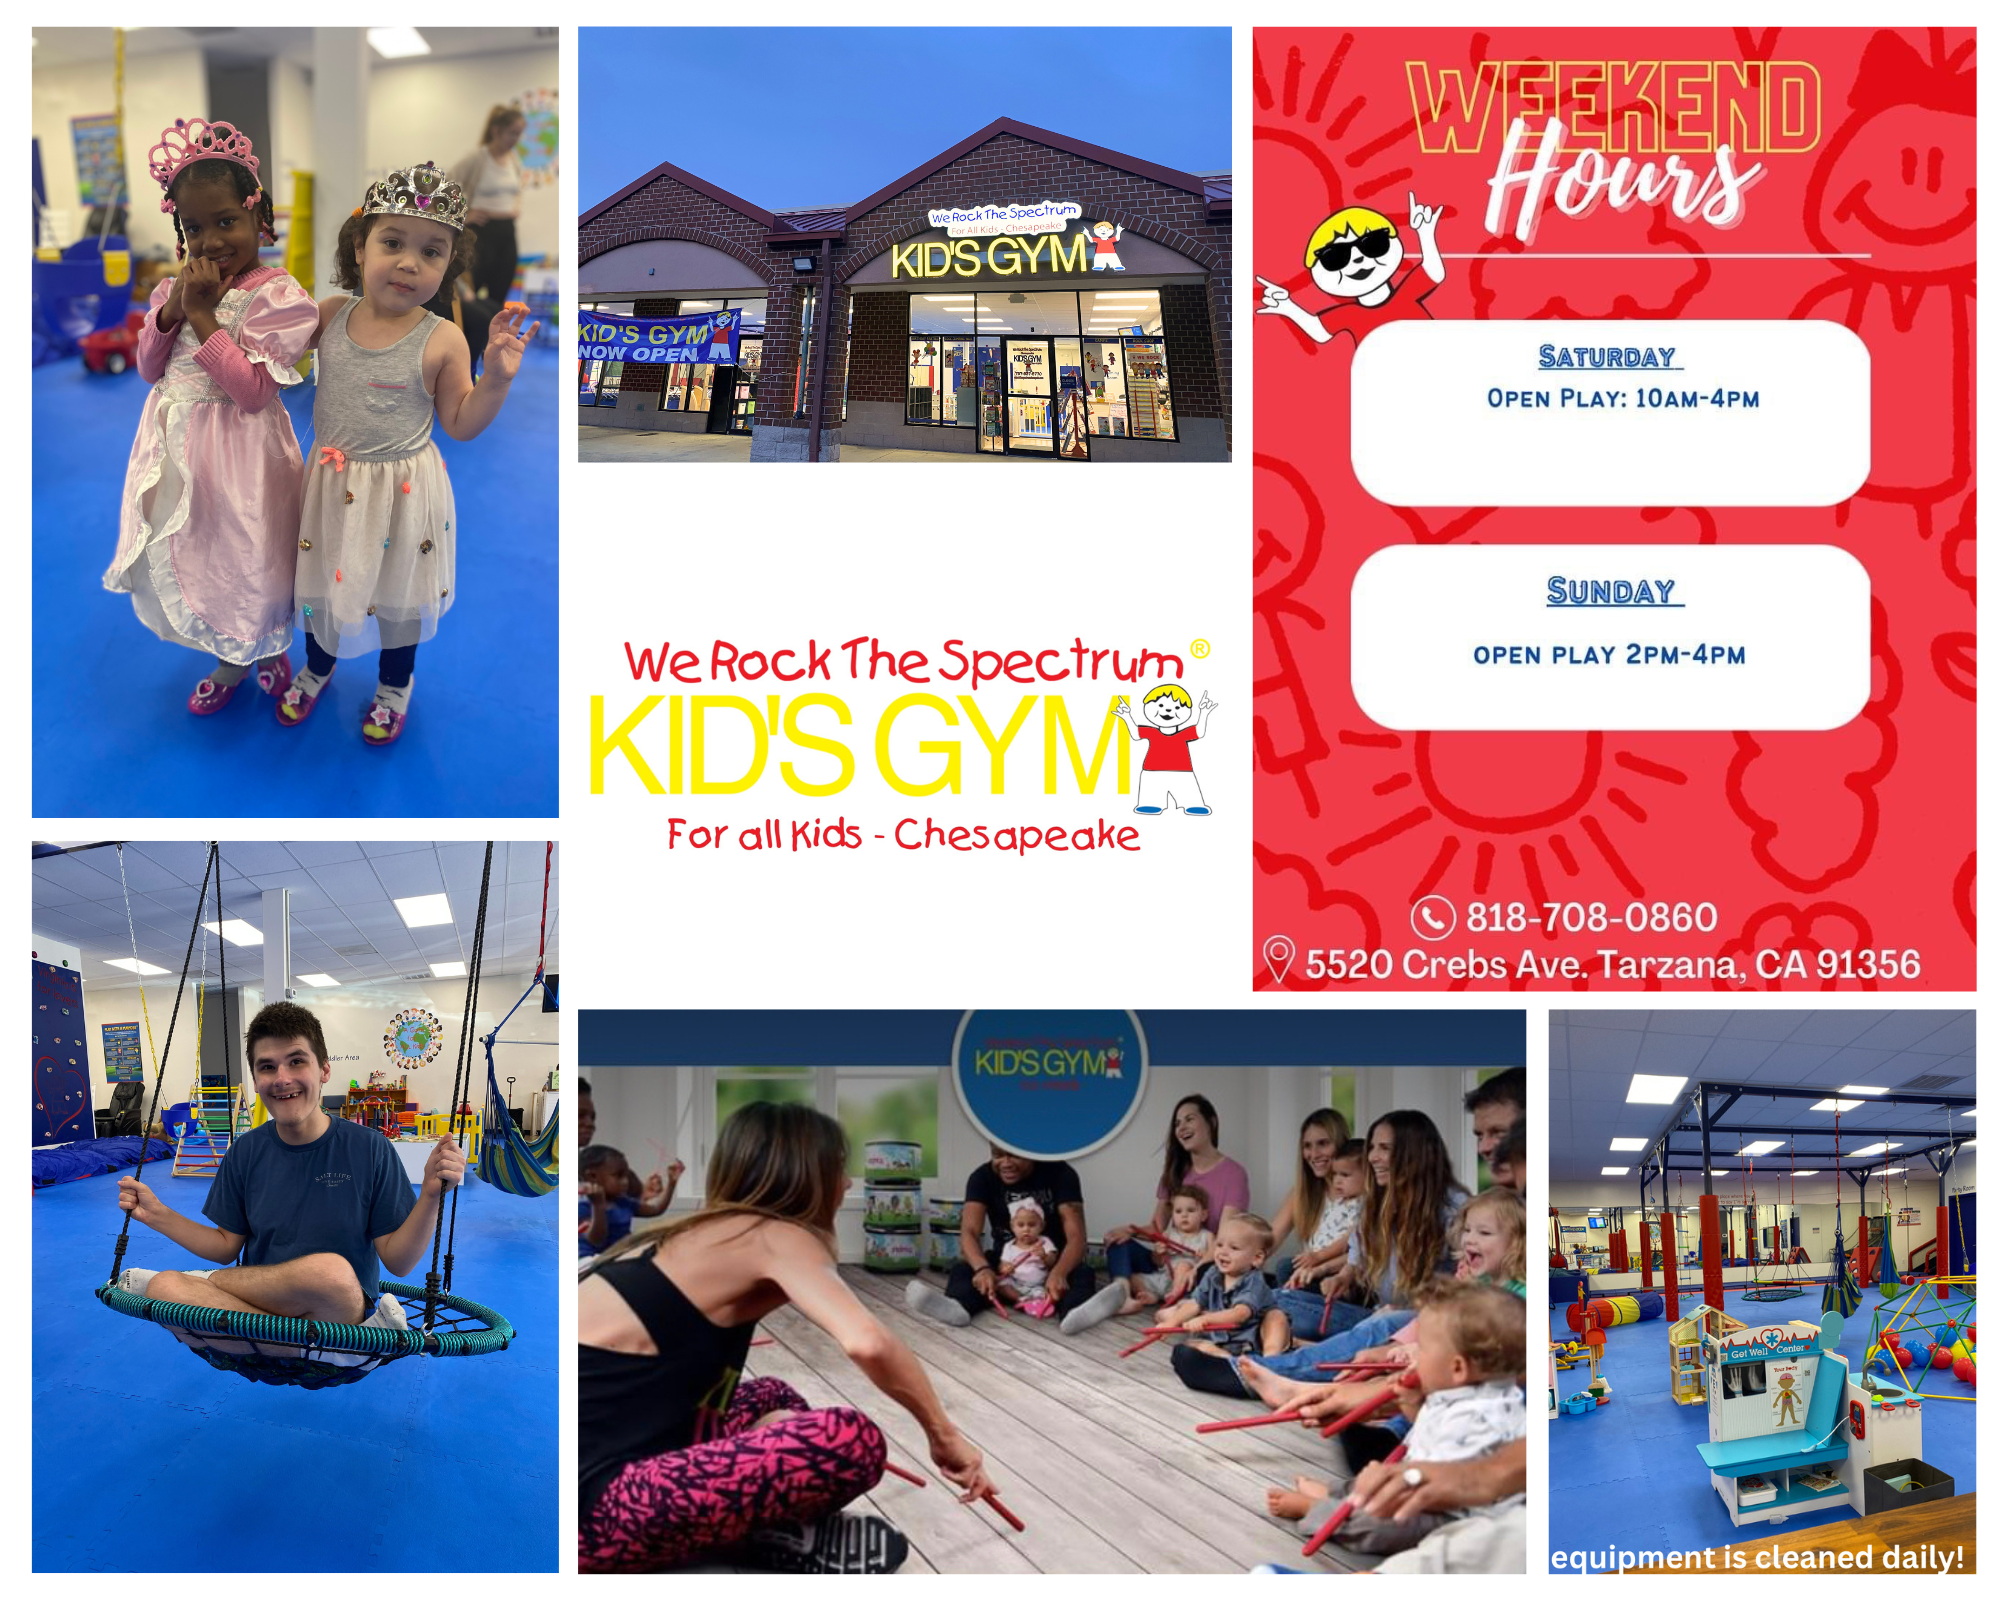 A collage of images showing activities, times, and kids playing at We Rock the Spectrum in Chesapeake, VA.